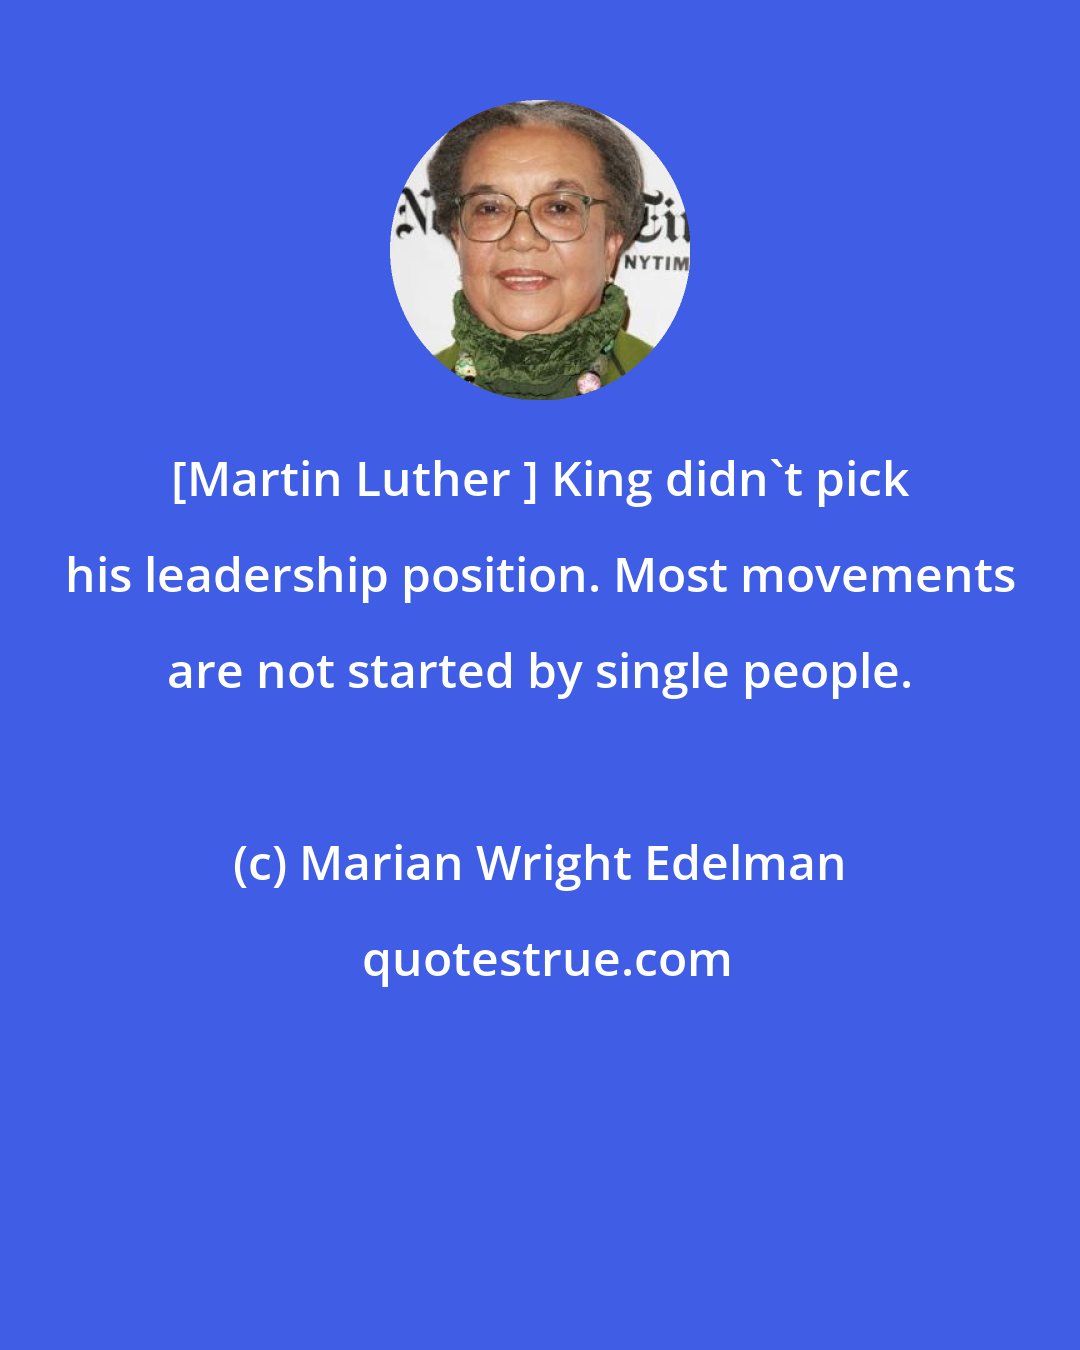 Marian Wright Edelman: [Martin Luther ] King didn't pick his leadership position. Most movements are not started by single people.